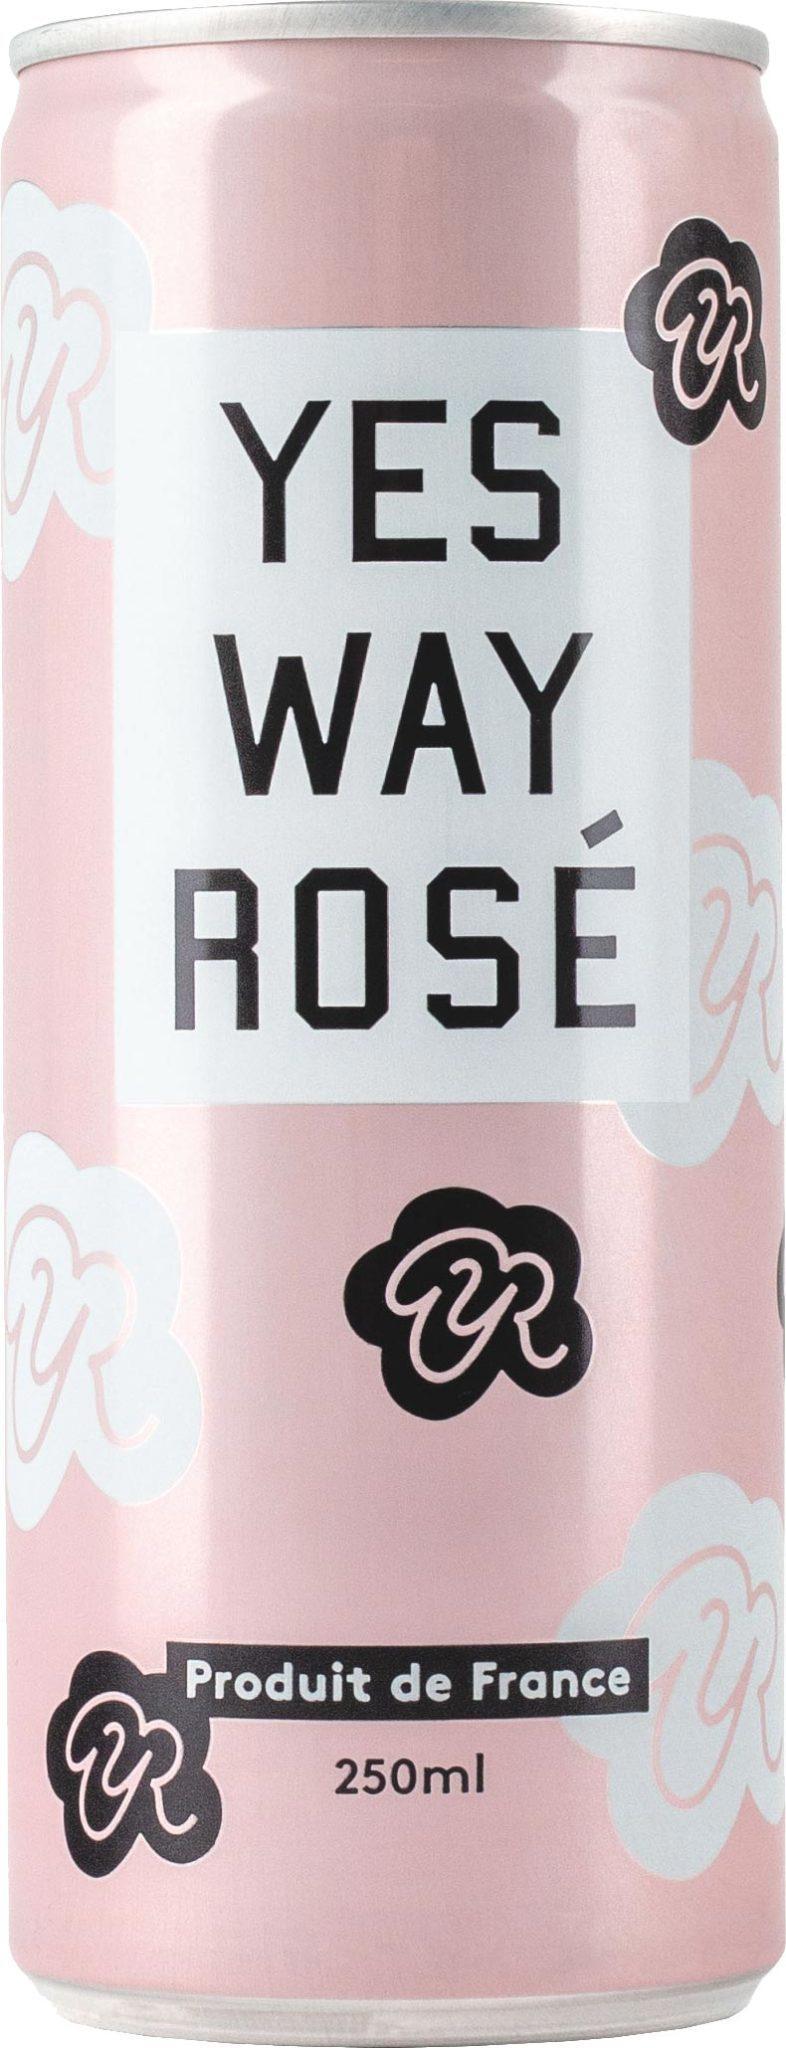 YES WAY ROSE CAN - Bk Wine Depot Corp